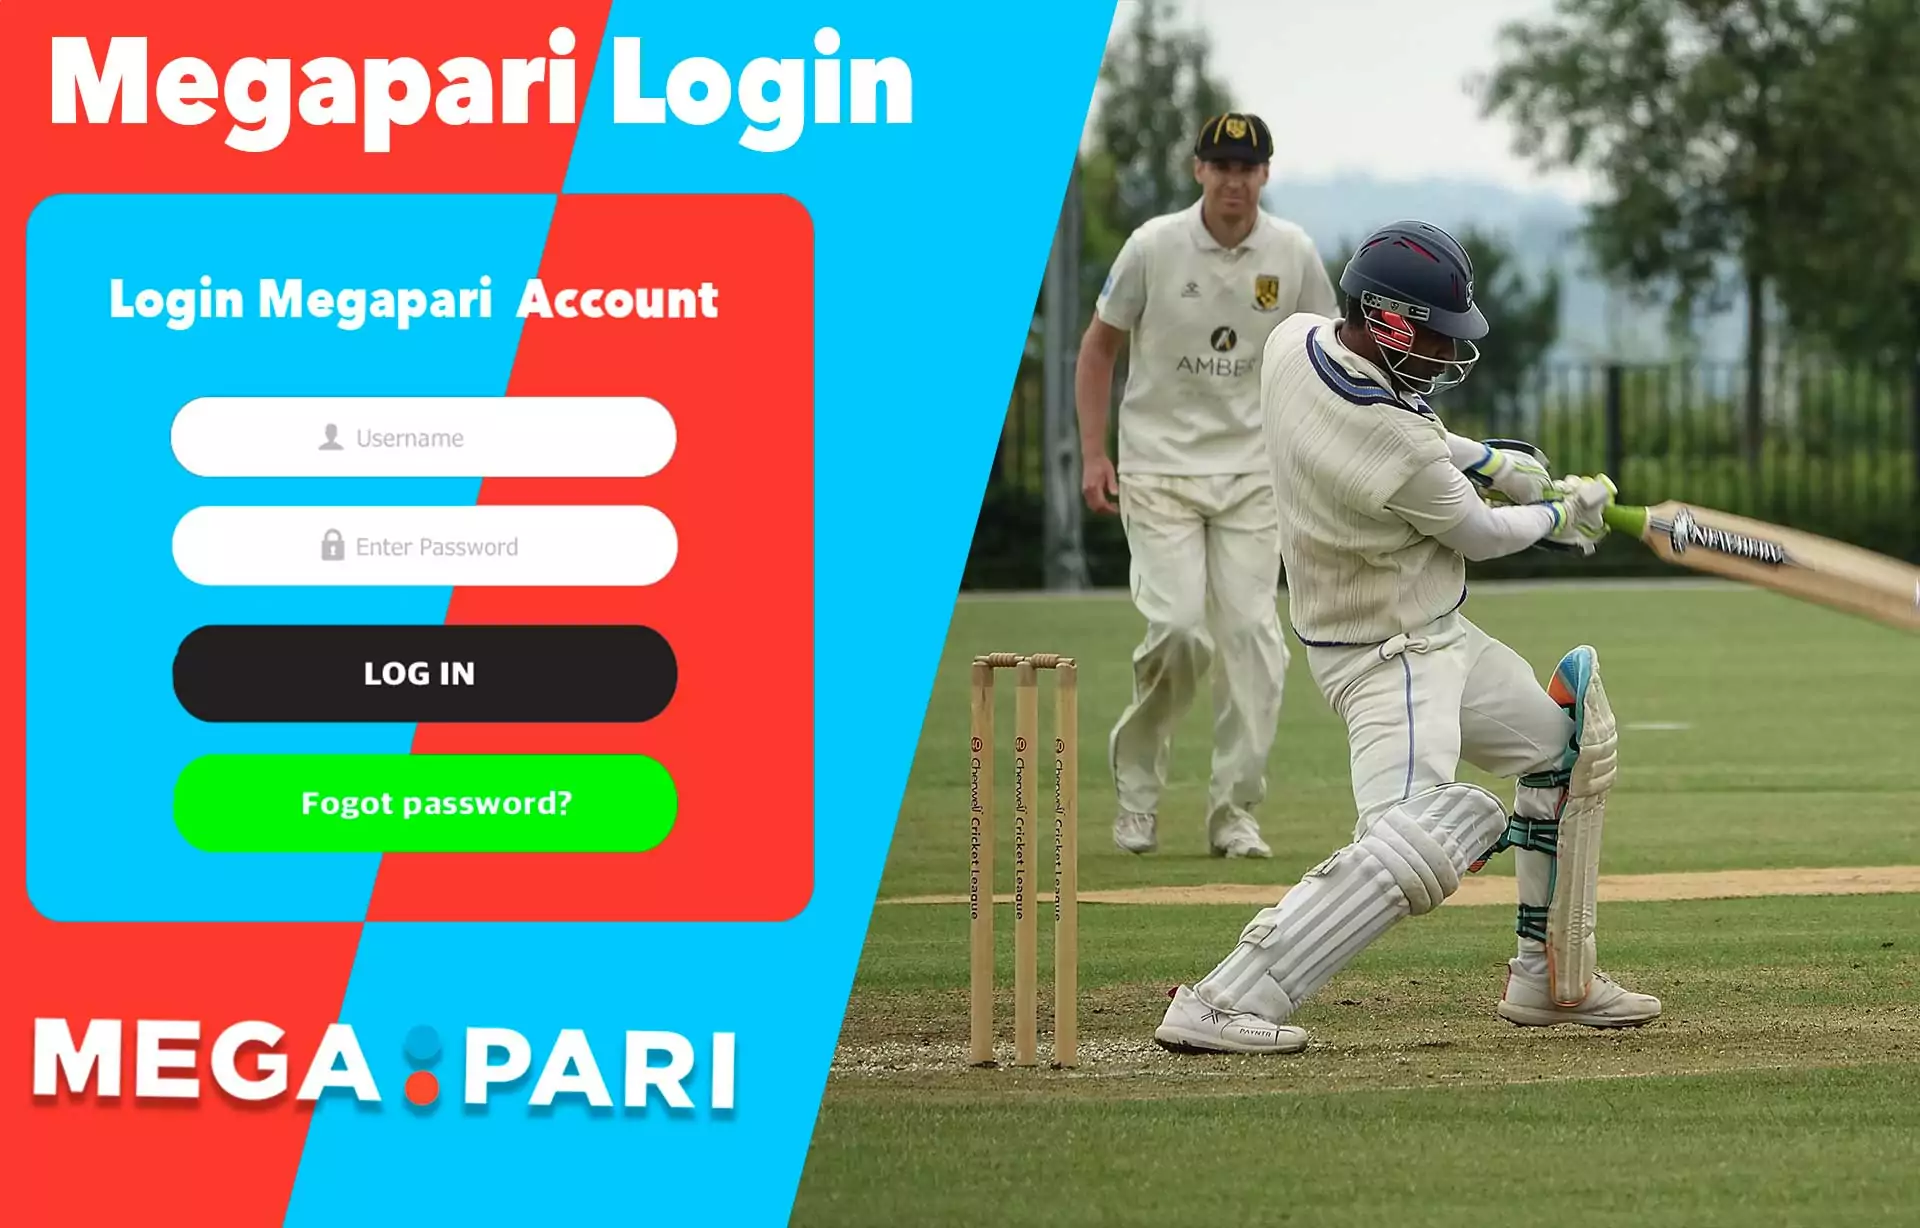 After registering, you can log in in your Megapari account.